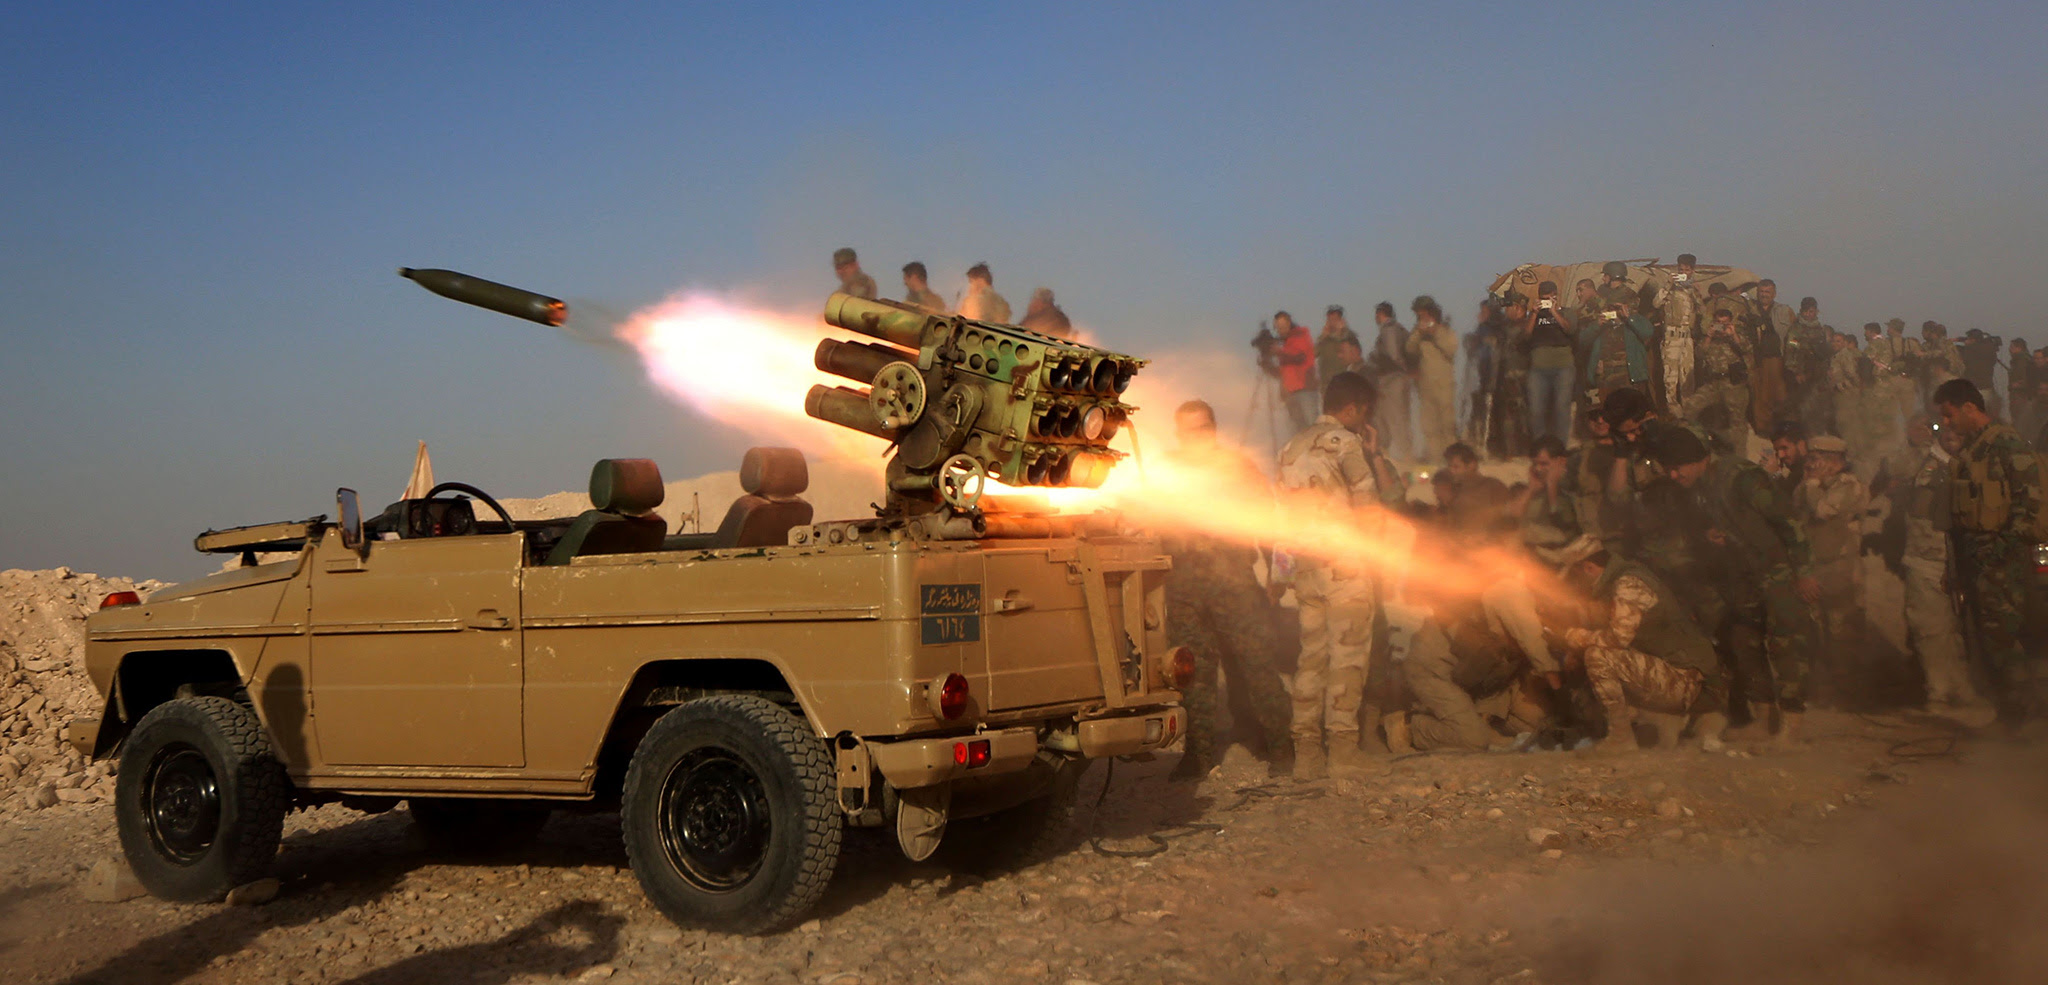 Iraqi Kurdish Peshmerga fighters fire a multiple rocket launcher from a position in Sheikh Ali village near the town of Bashiqa, some 25 kilometres north east of Mosul during an operation against Islamic State group jihadists to retake the main hub city.